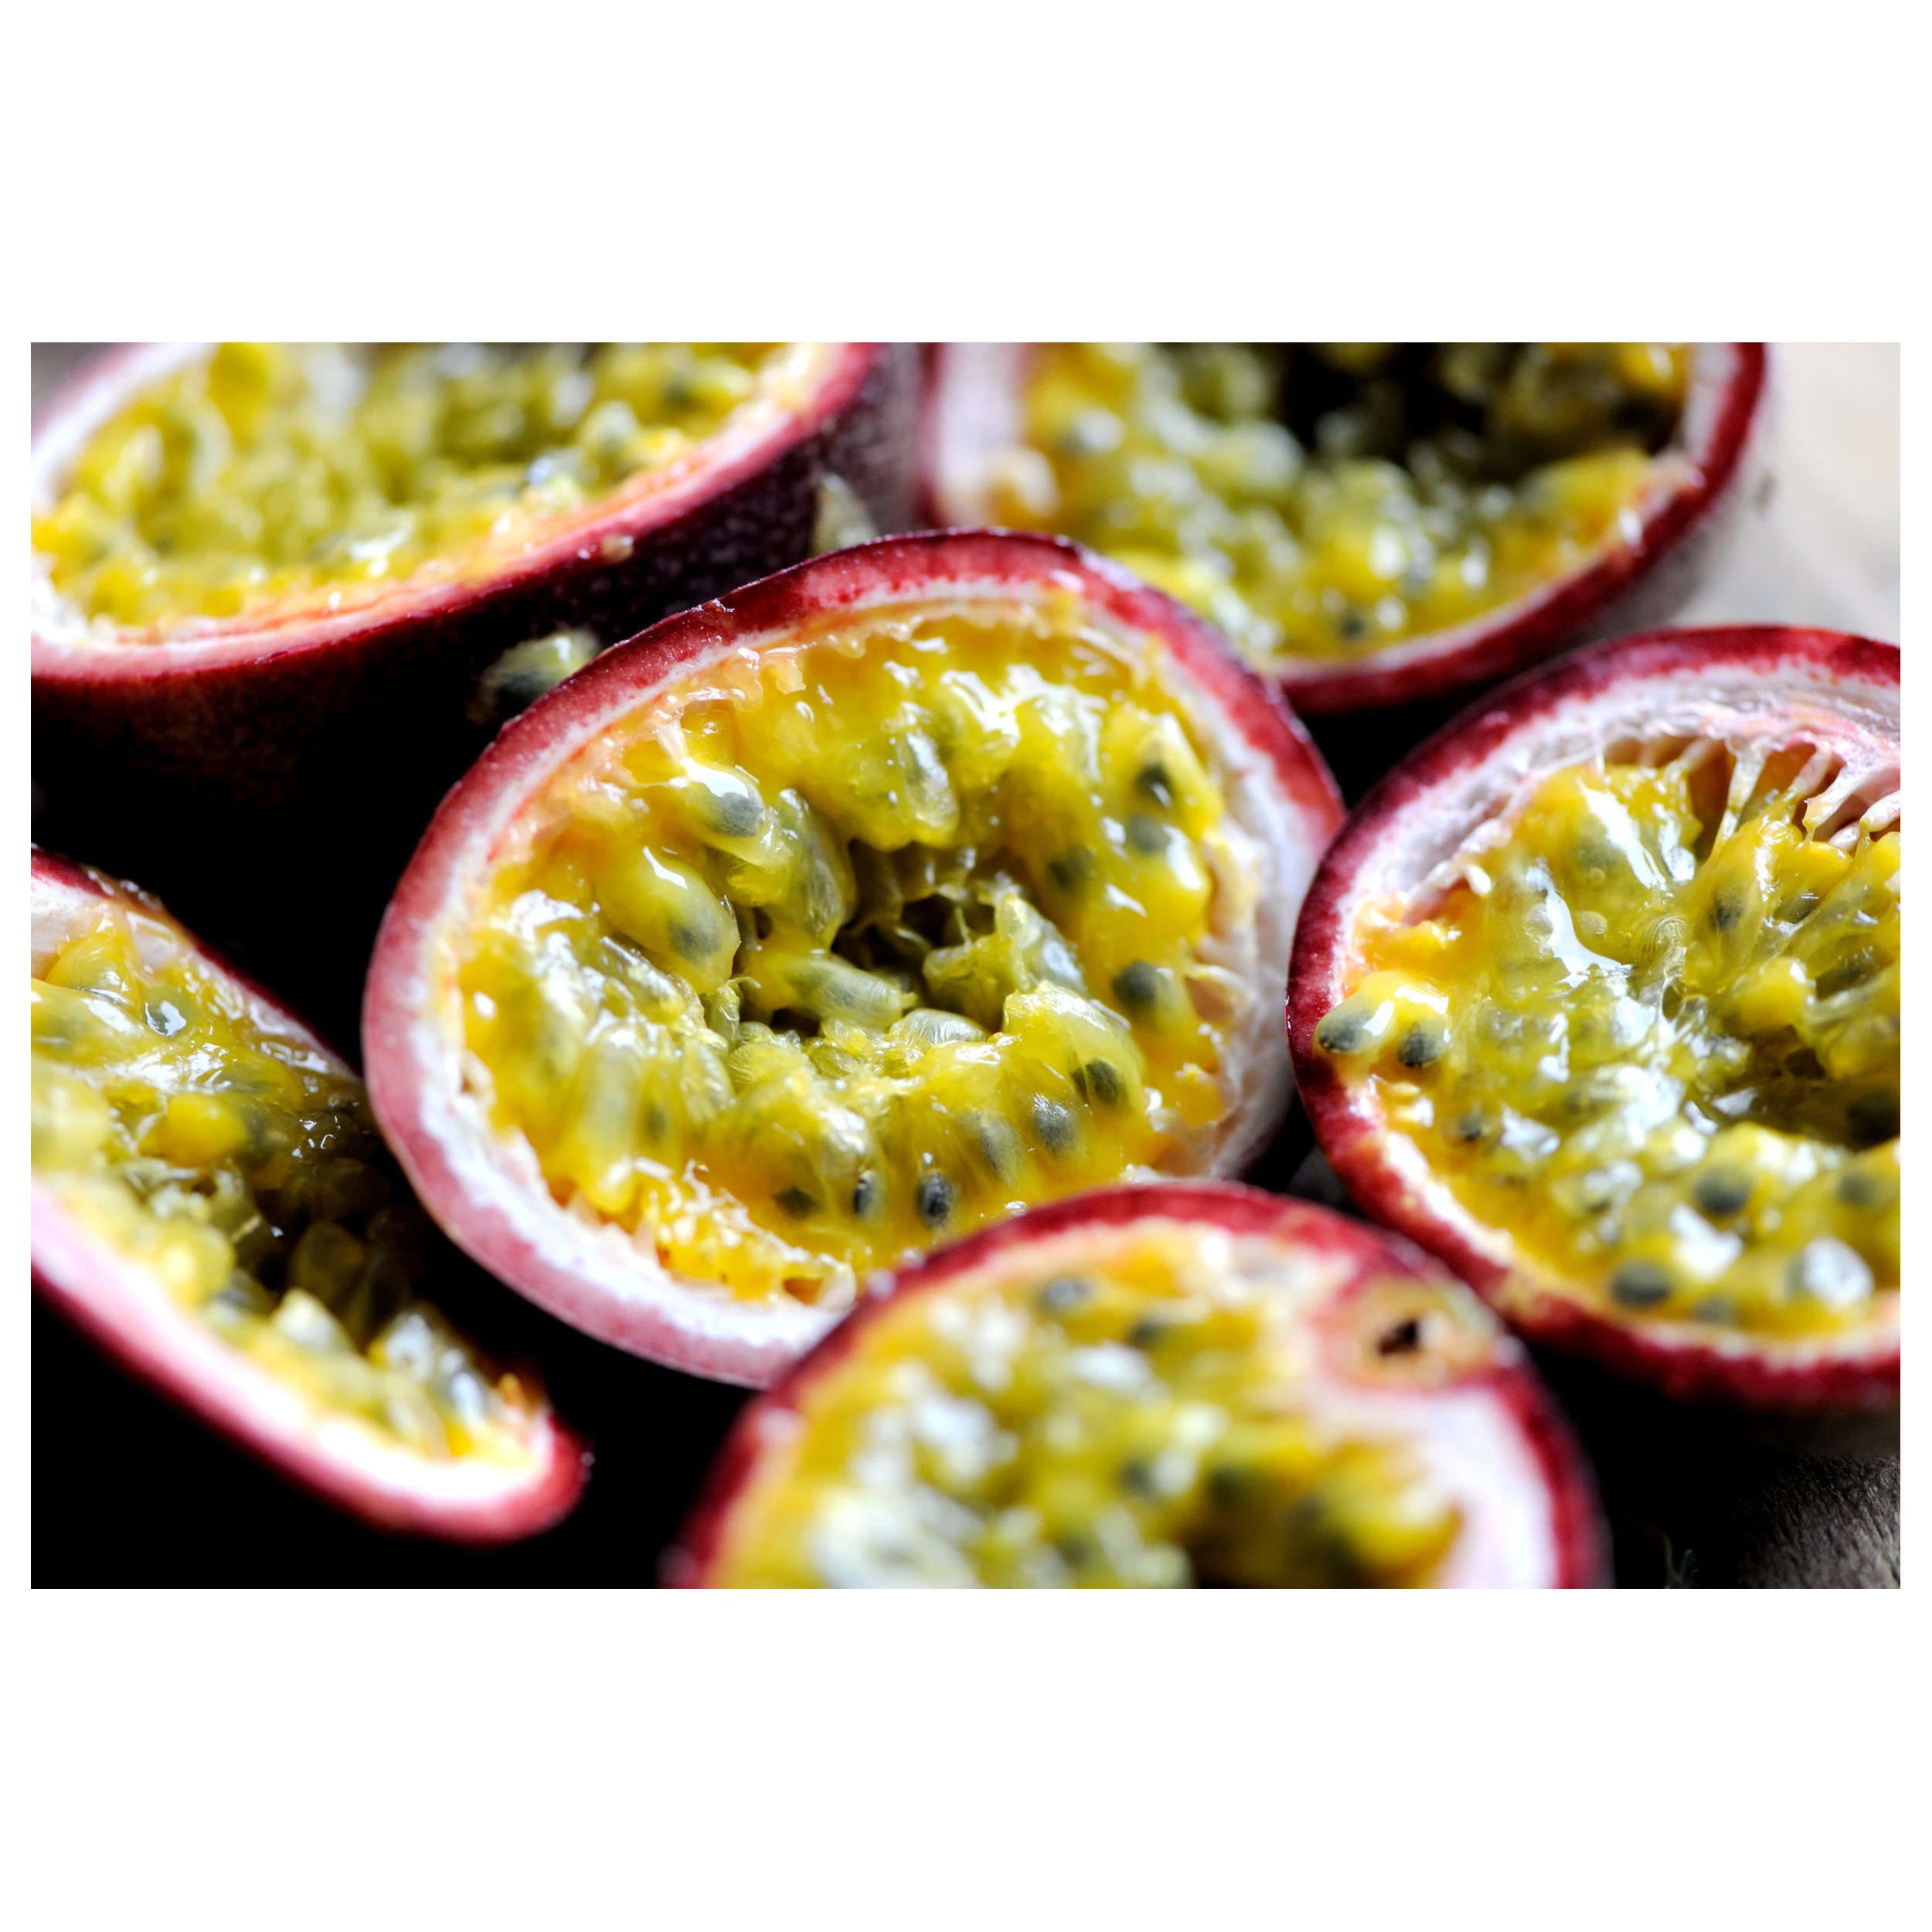 Fresh Passion Fruit Grown in Vietnam Natural Sweet | Vietnam Agricultural Export Products | Best Price for Buy in Bulk | Inquiry